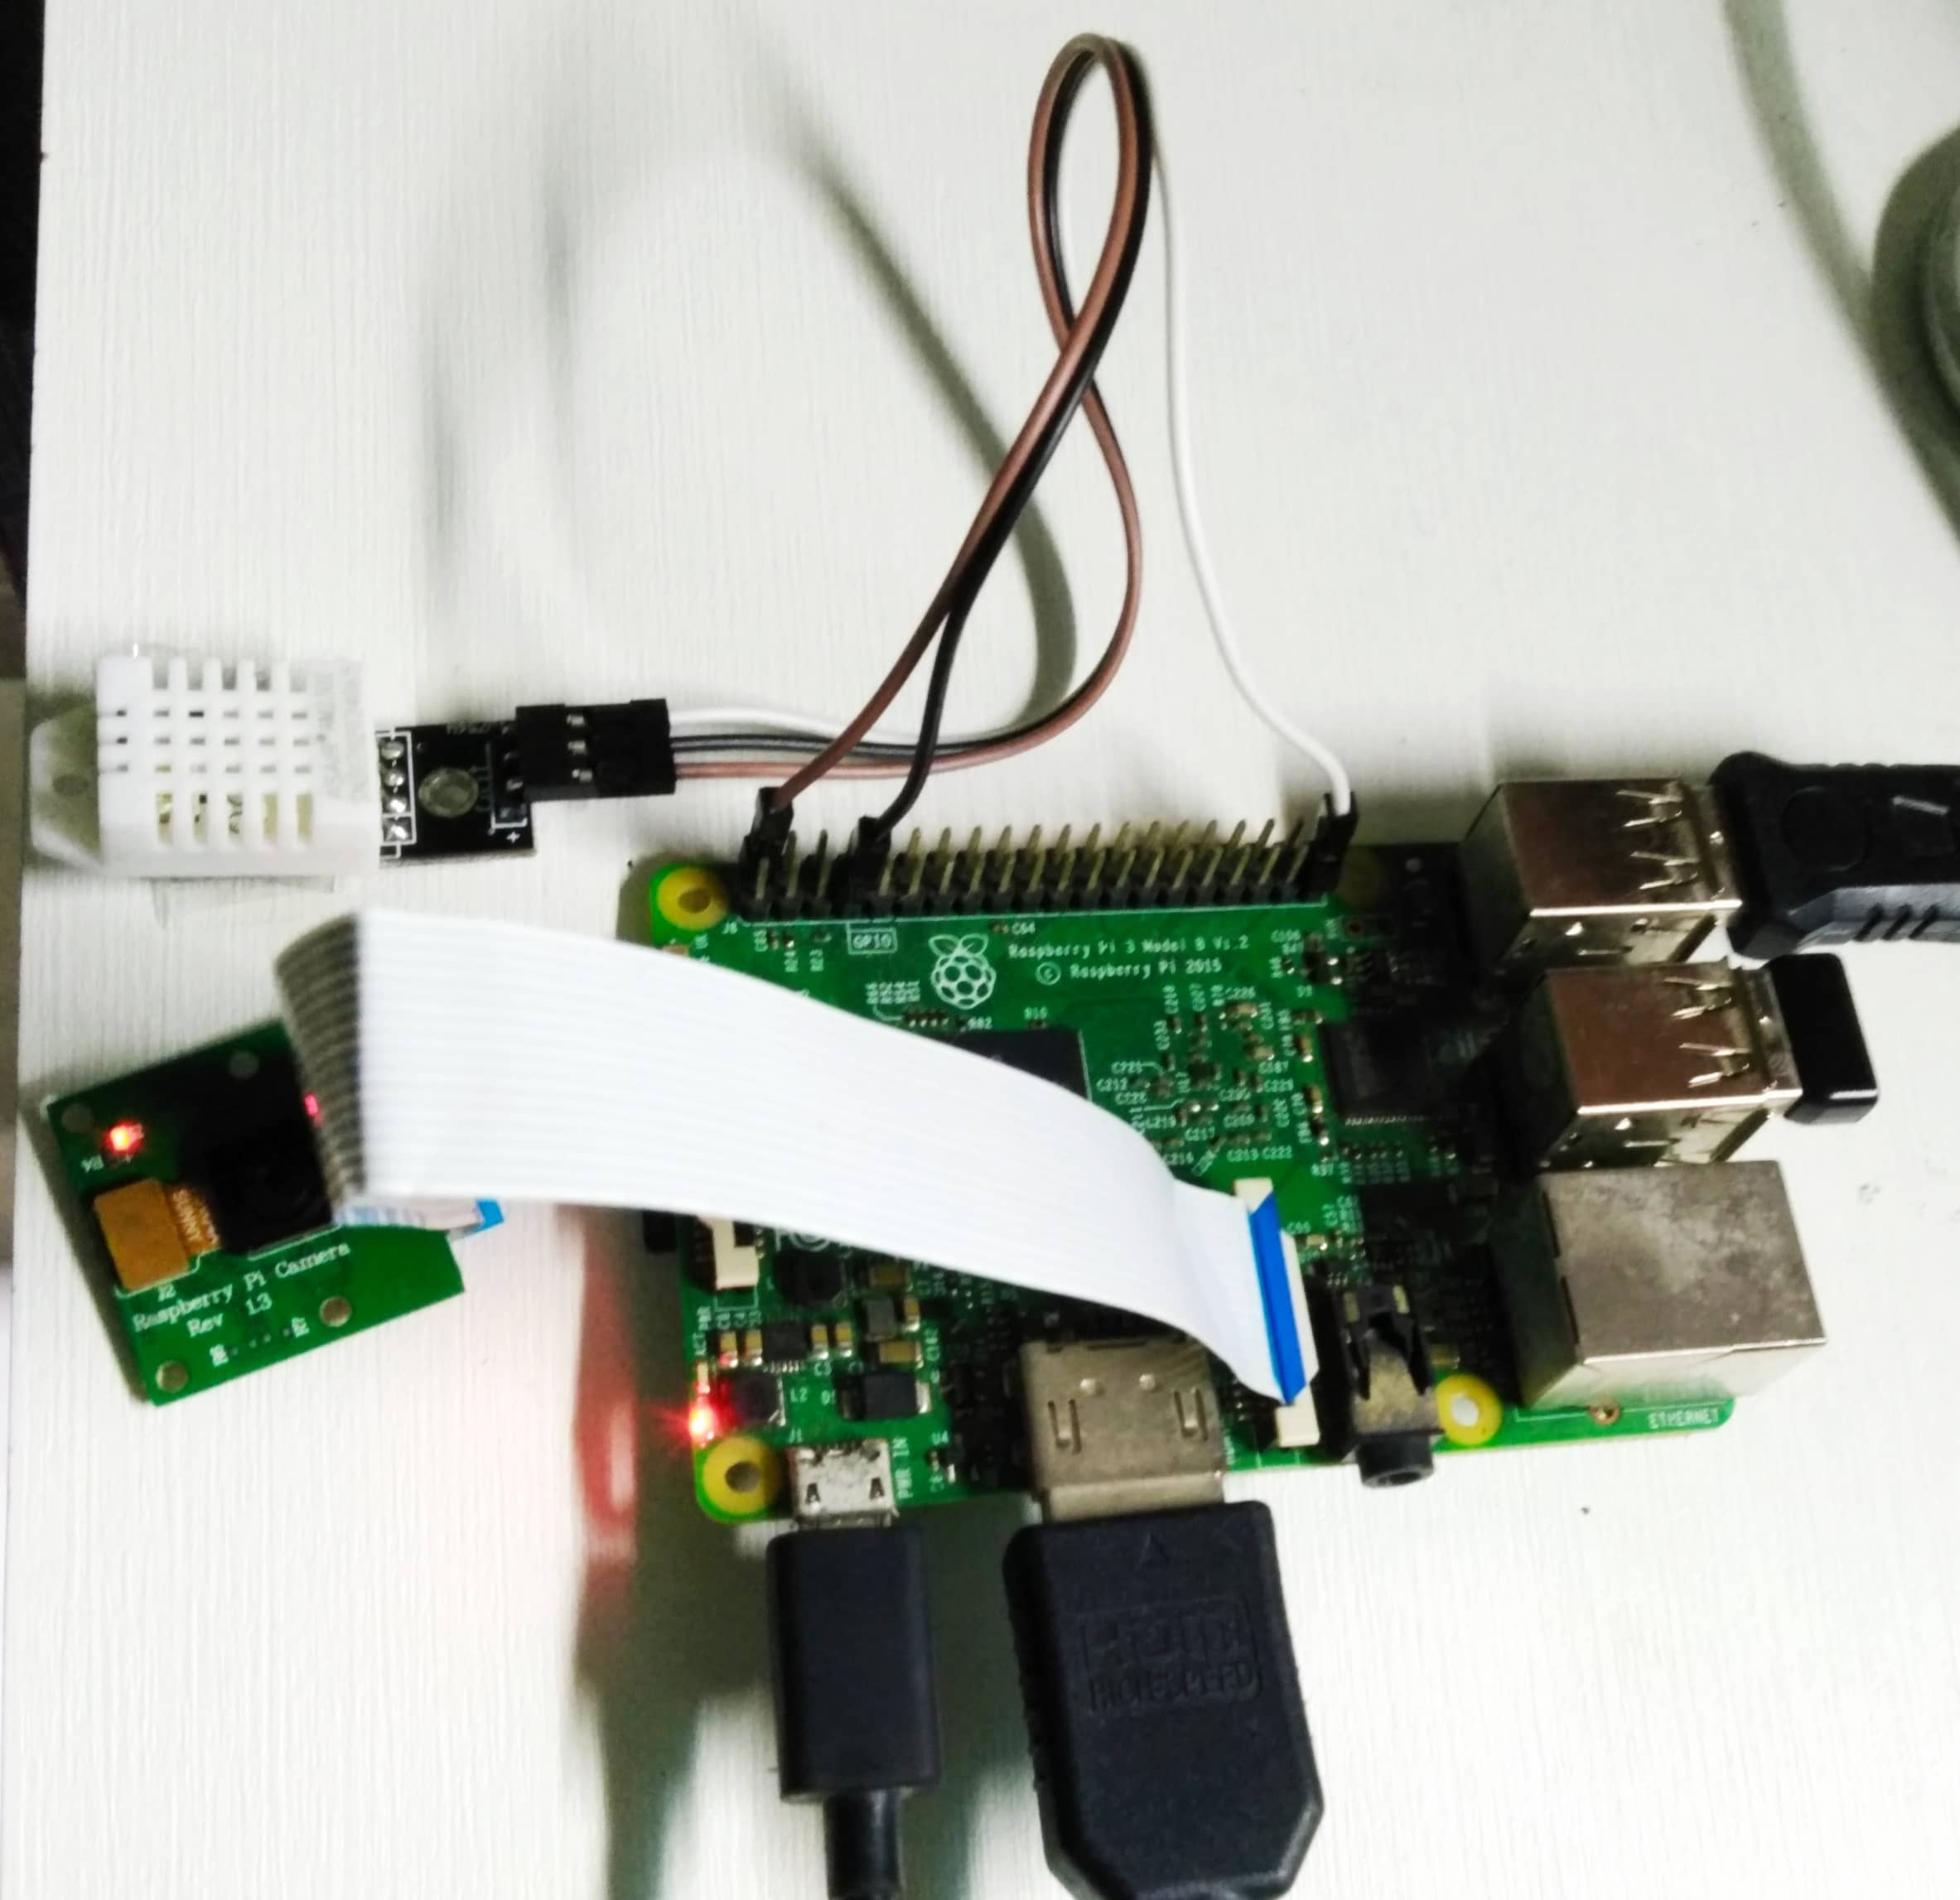 DHT sensor connected to Raspberry-Pi